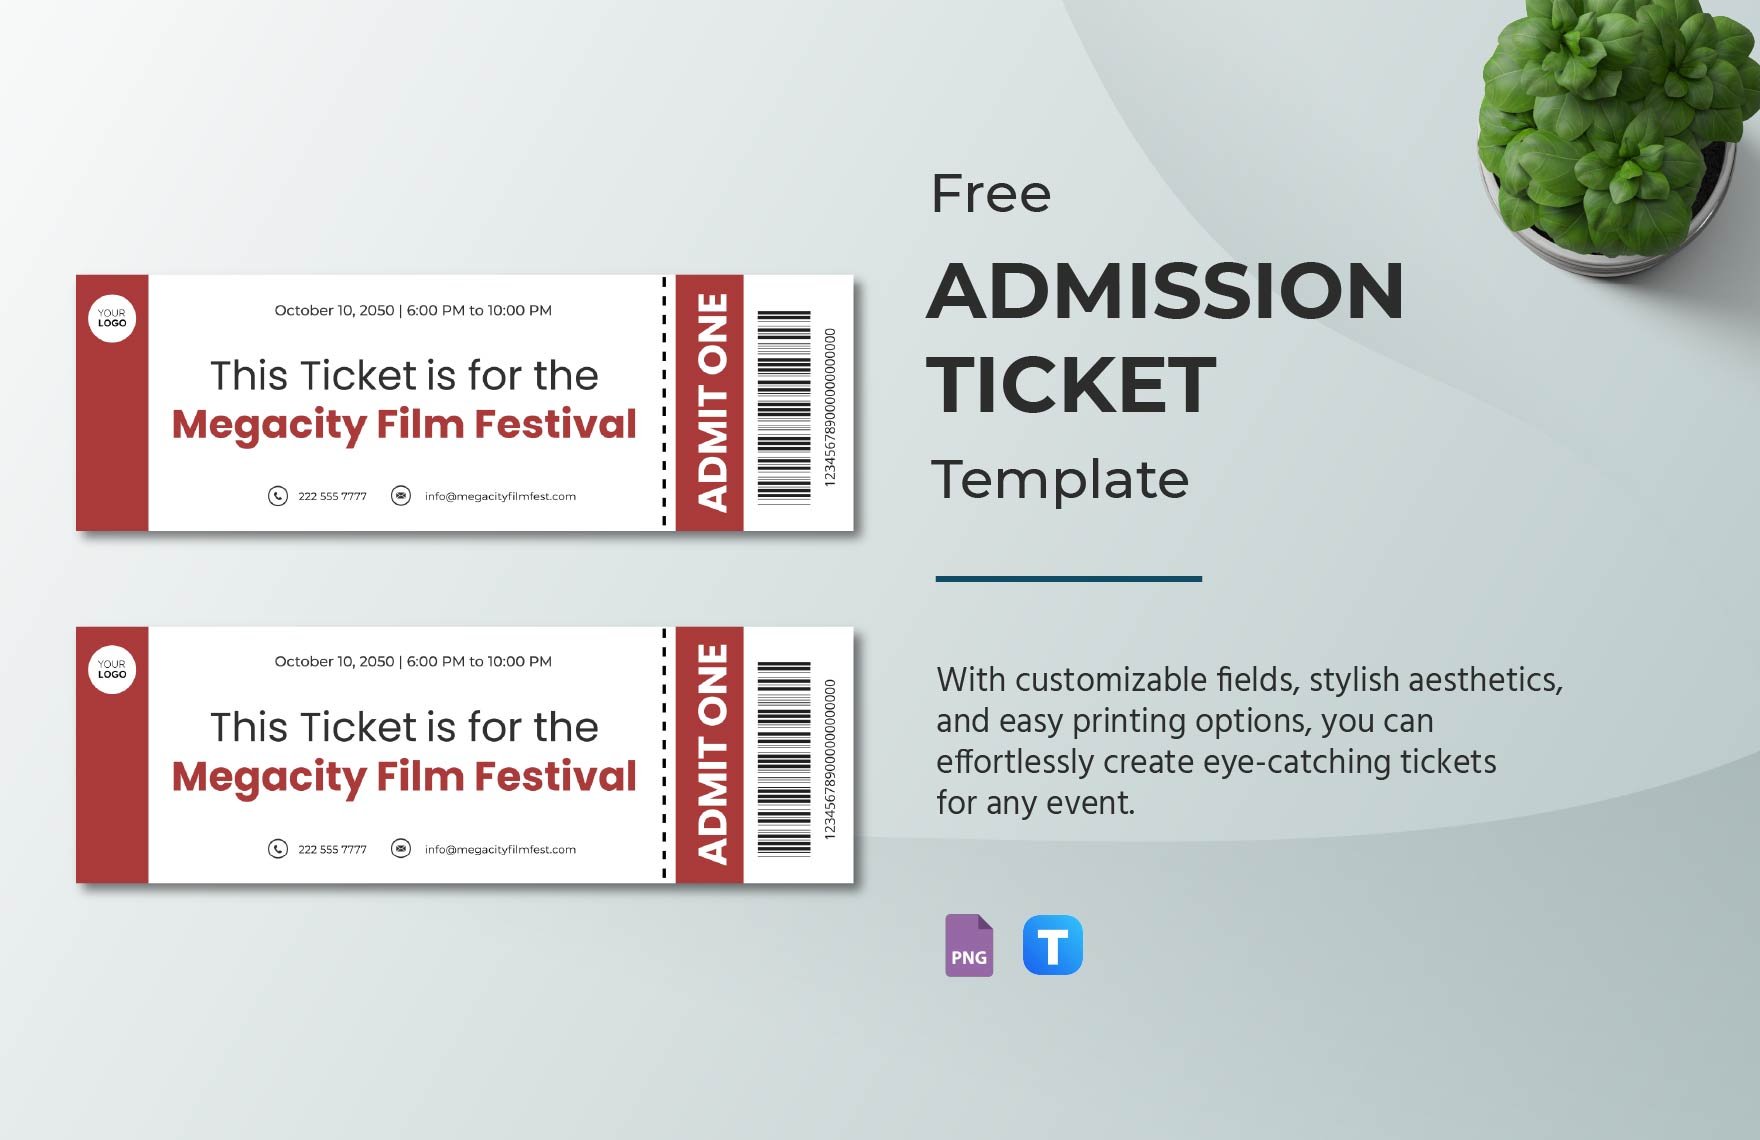 Admission Ticket Template in PNG